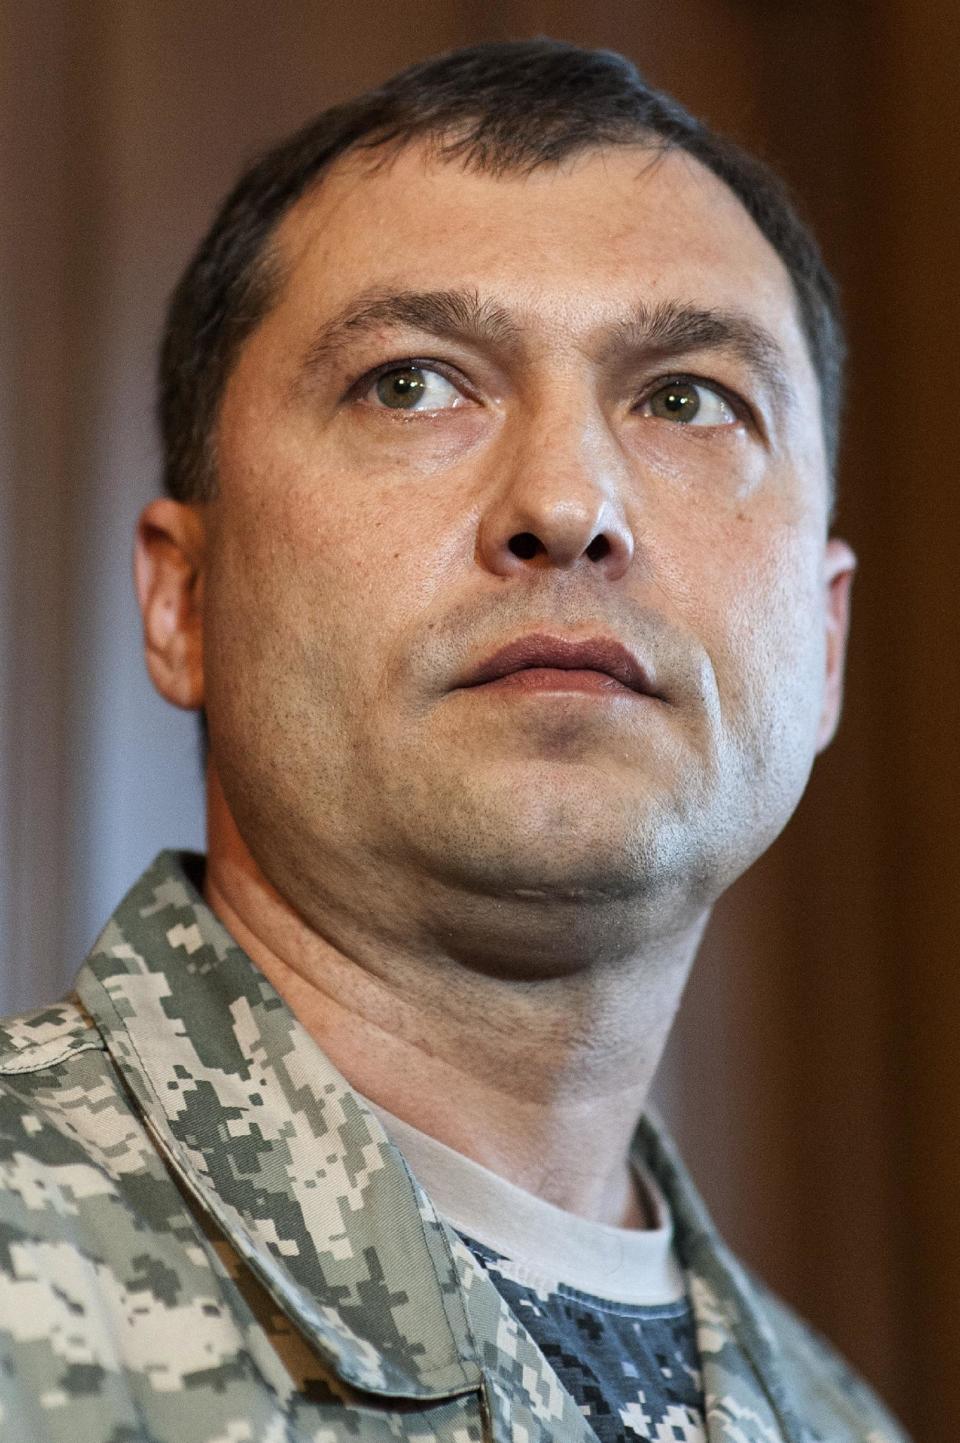 In this photo taken on Saturday, May 10, 2014, Valeriy Bolotov, people’s governor of Luhansk, pauses during a news conference the Ukrainian regional office of the Security Service in the eastern Ukraine city of Luhansk. On Tuesday, Russian news wires quoted insurgents as saying that unidentified assailants fired at a car in which Valery Bolotov, the leader of insurgency in the Luhansk region, was riding. Bolotov was hospitalized with wounds. Bolotov was the one to announce independence Monday for his region. (AP Photo/Evgeniy Maloletka)